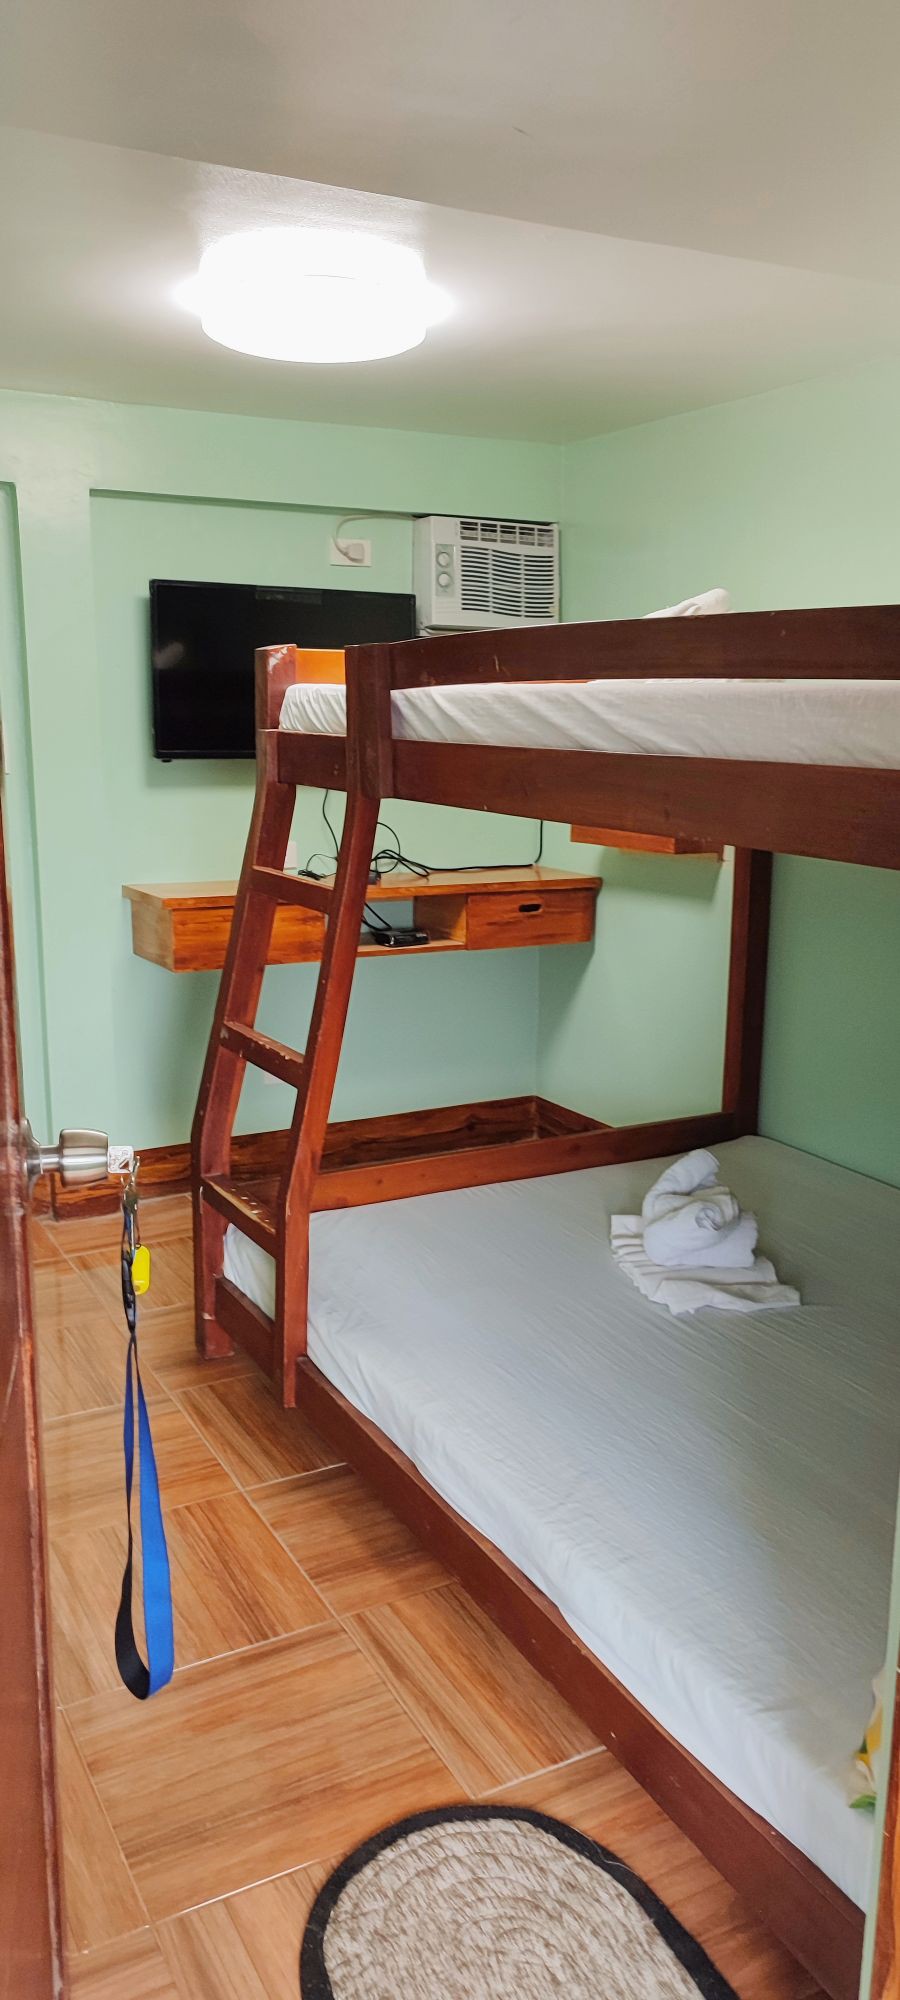 Double Bunk Bed Room